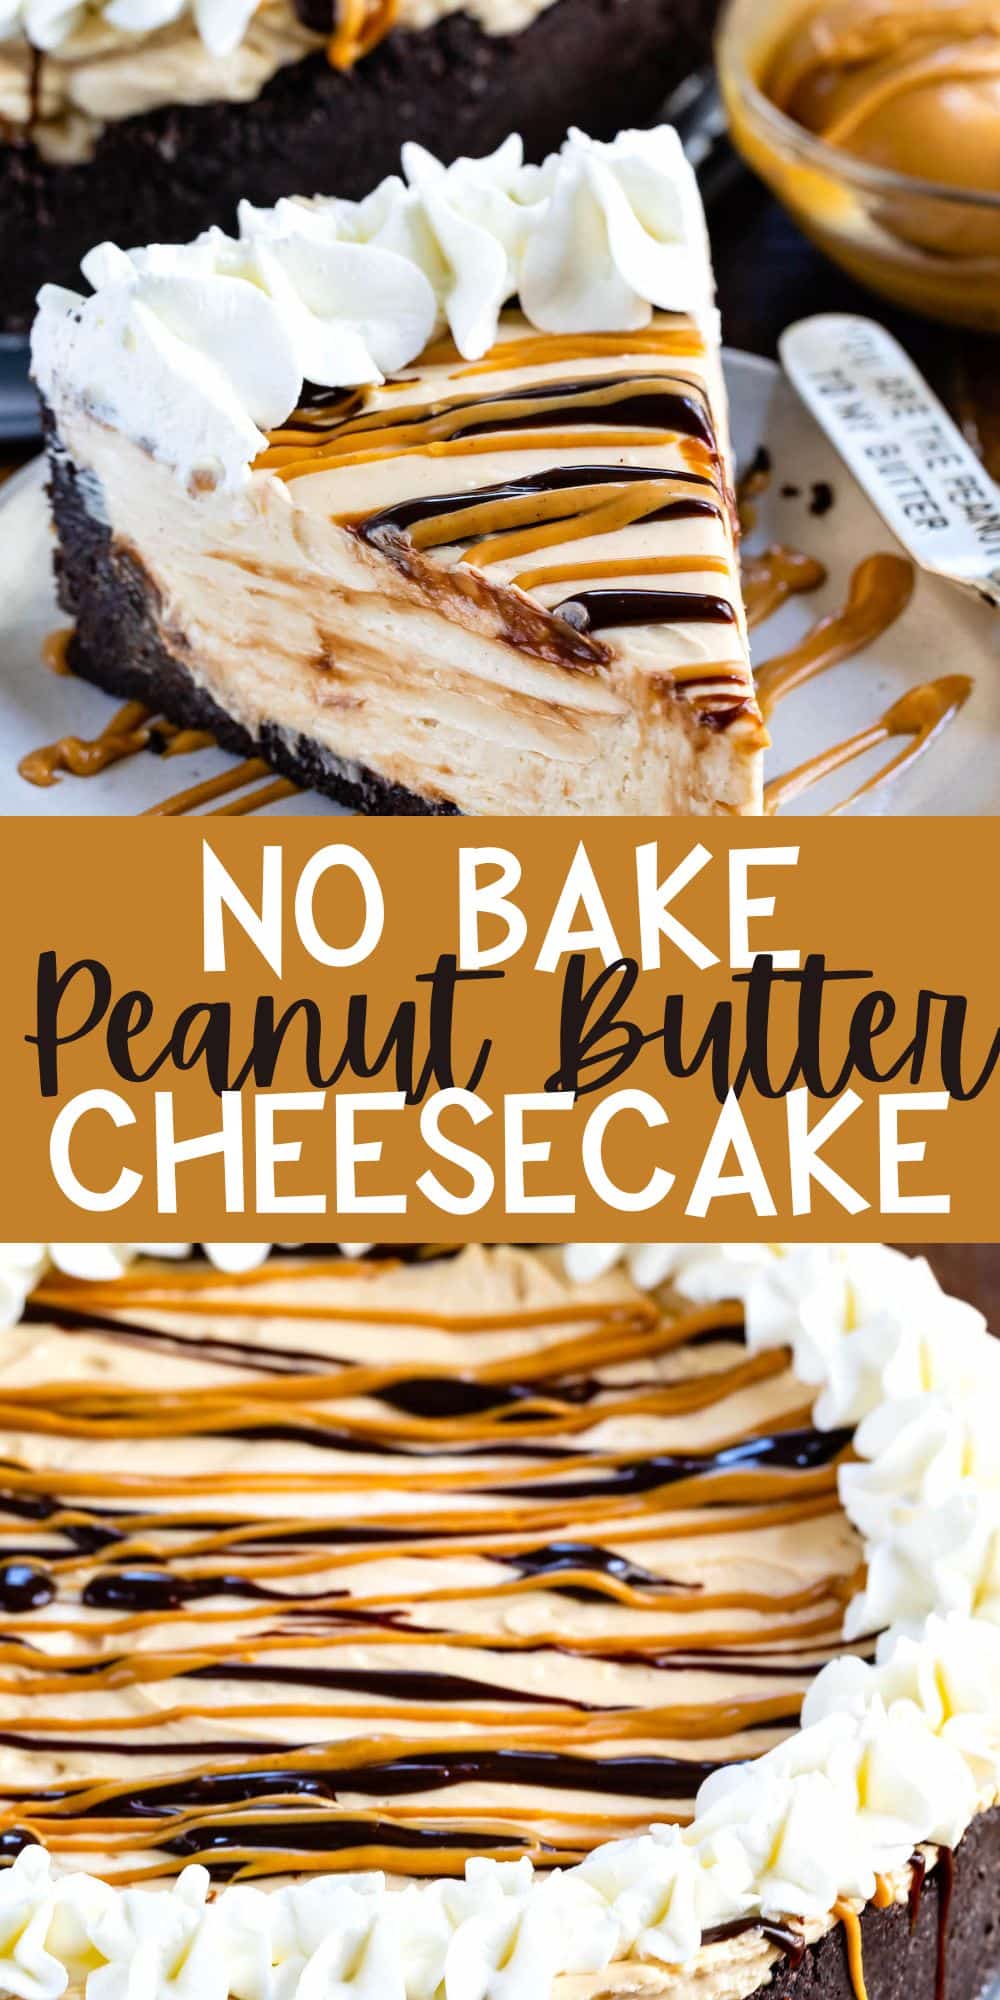 two photos of cheesecake with peanut butter and chocolate sauce drizzled over it and whipped cream on the edge with words on the image.